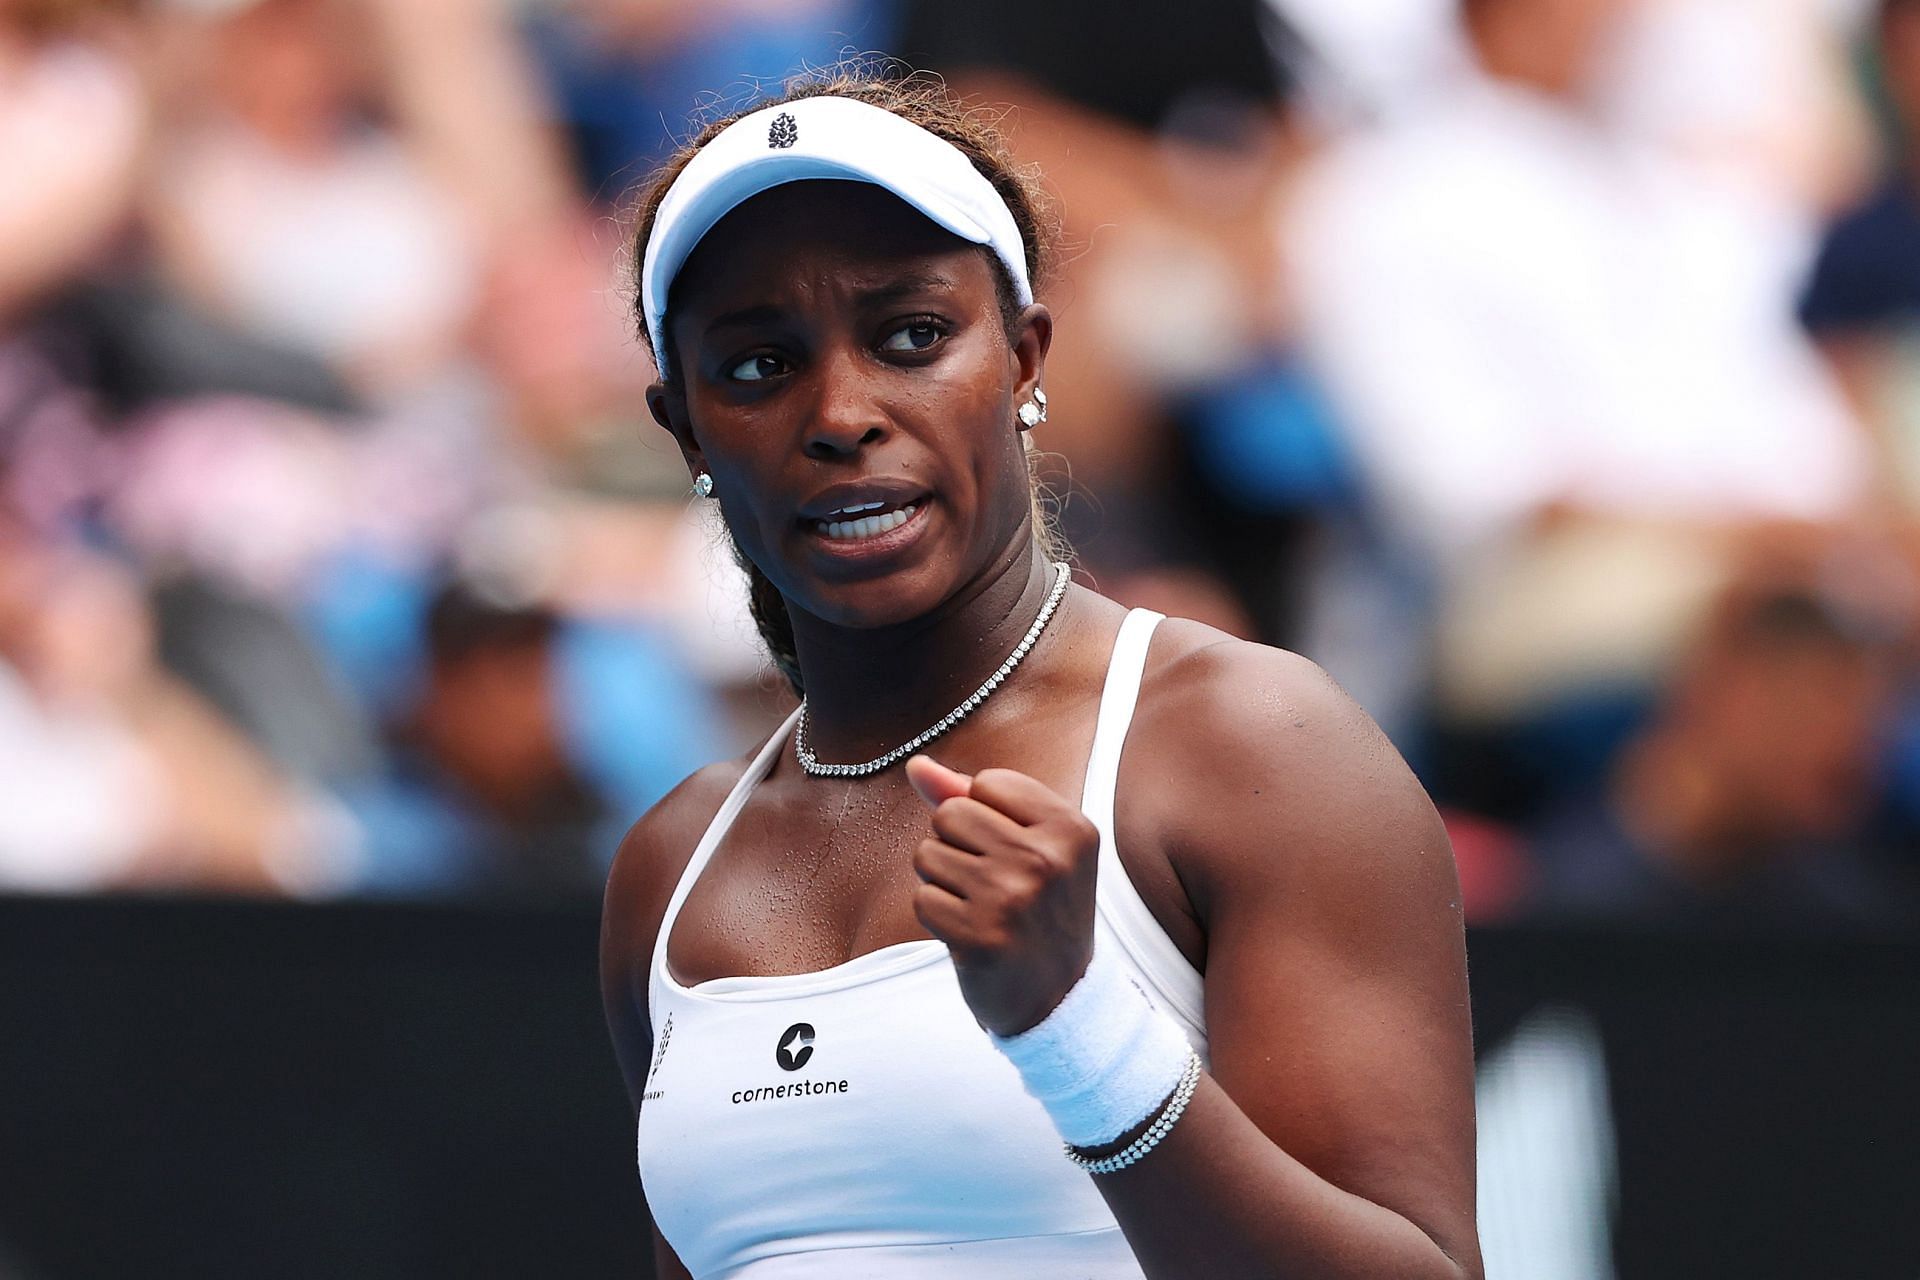 "I’m miles ahead of where I was last year" Sloane Stephens remains